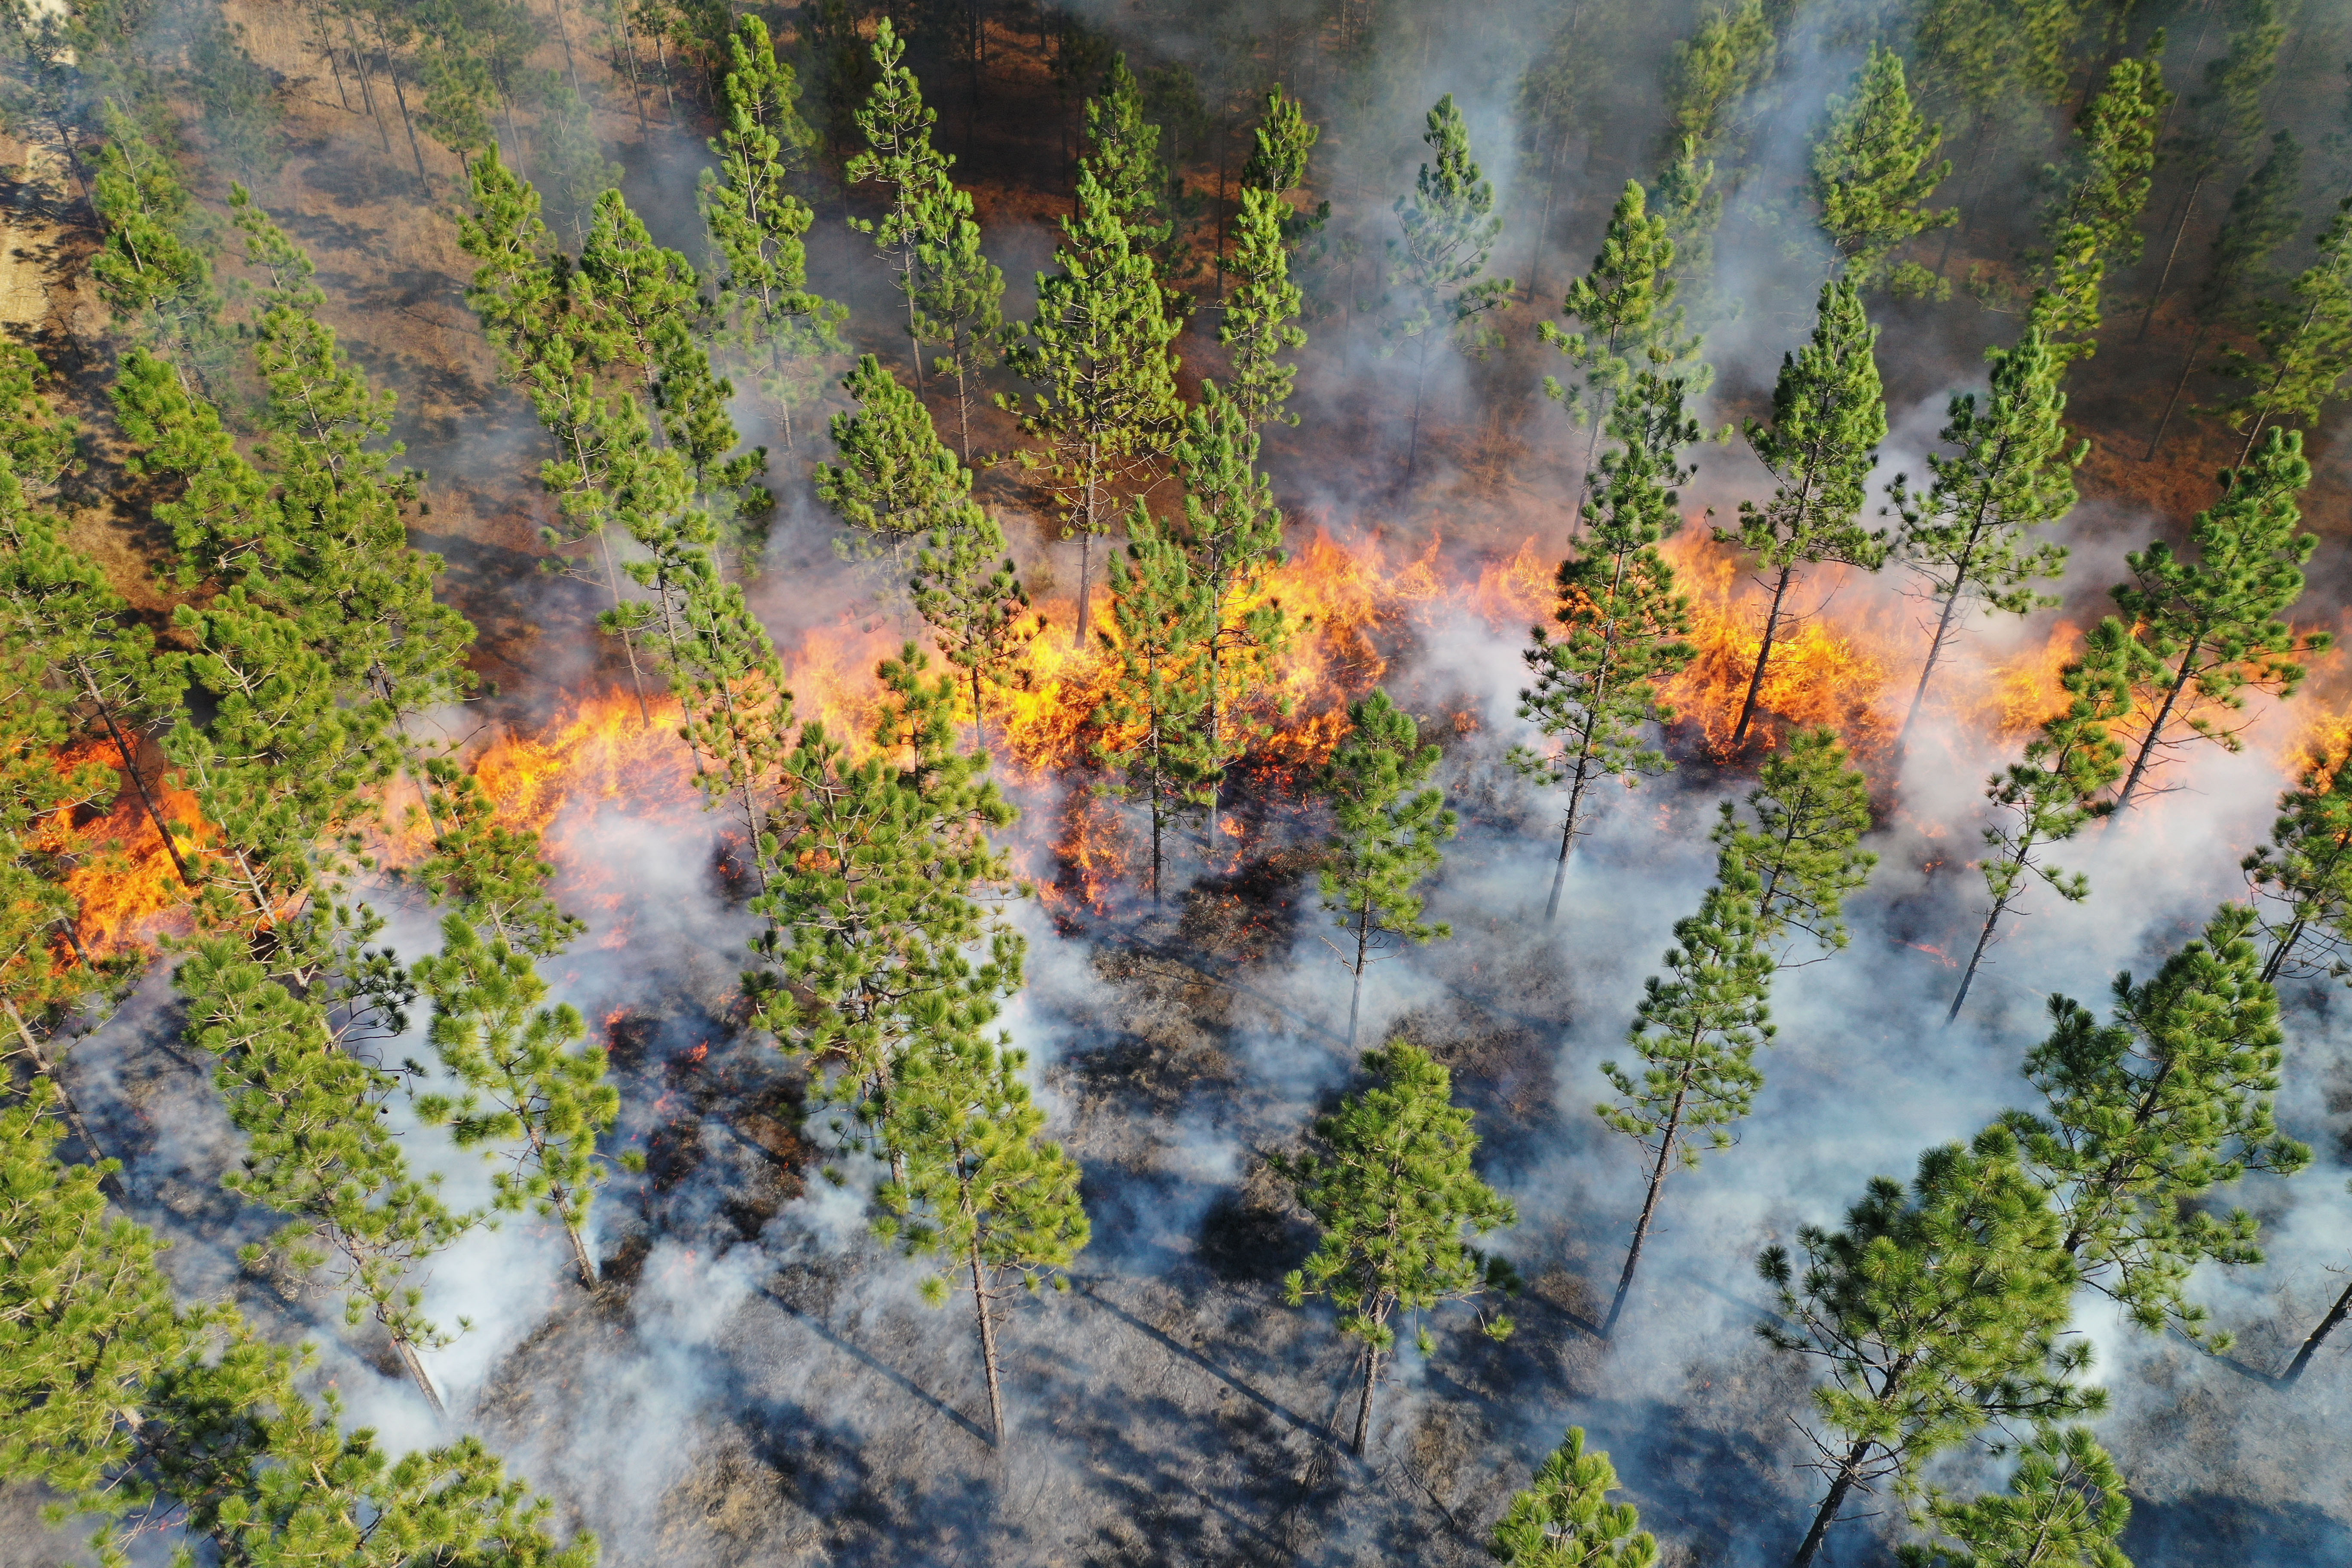 Aerial view of prescribed burn at Calloway Forest Preserve in North Carolina. The fire moves over the ground cover and leaves the trees intact.